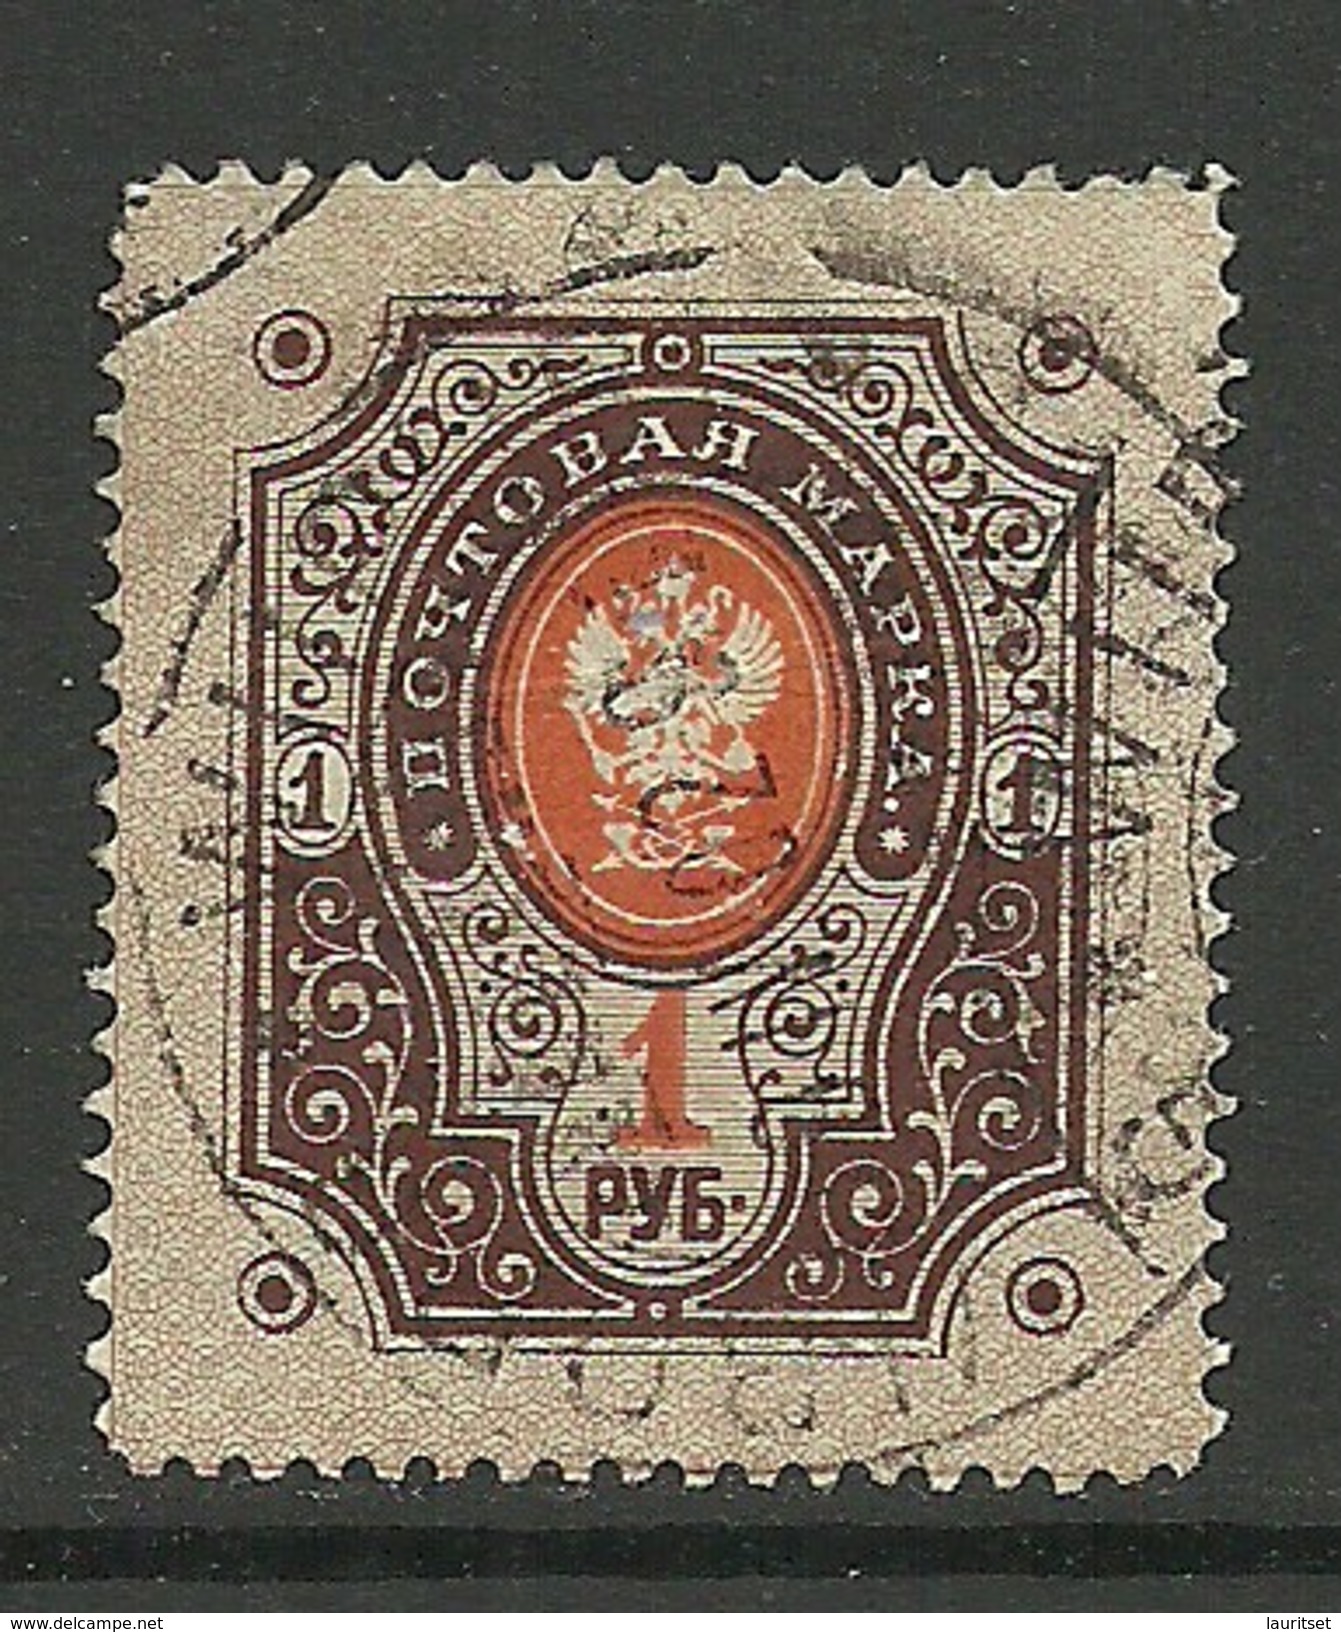 FINNLAND FINLAND 1891 Michel 45 O WIBORG Viipuri - Used Stamps